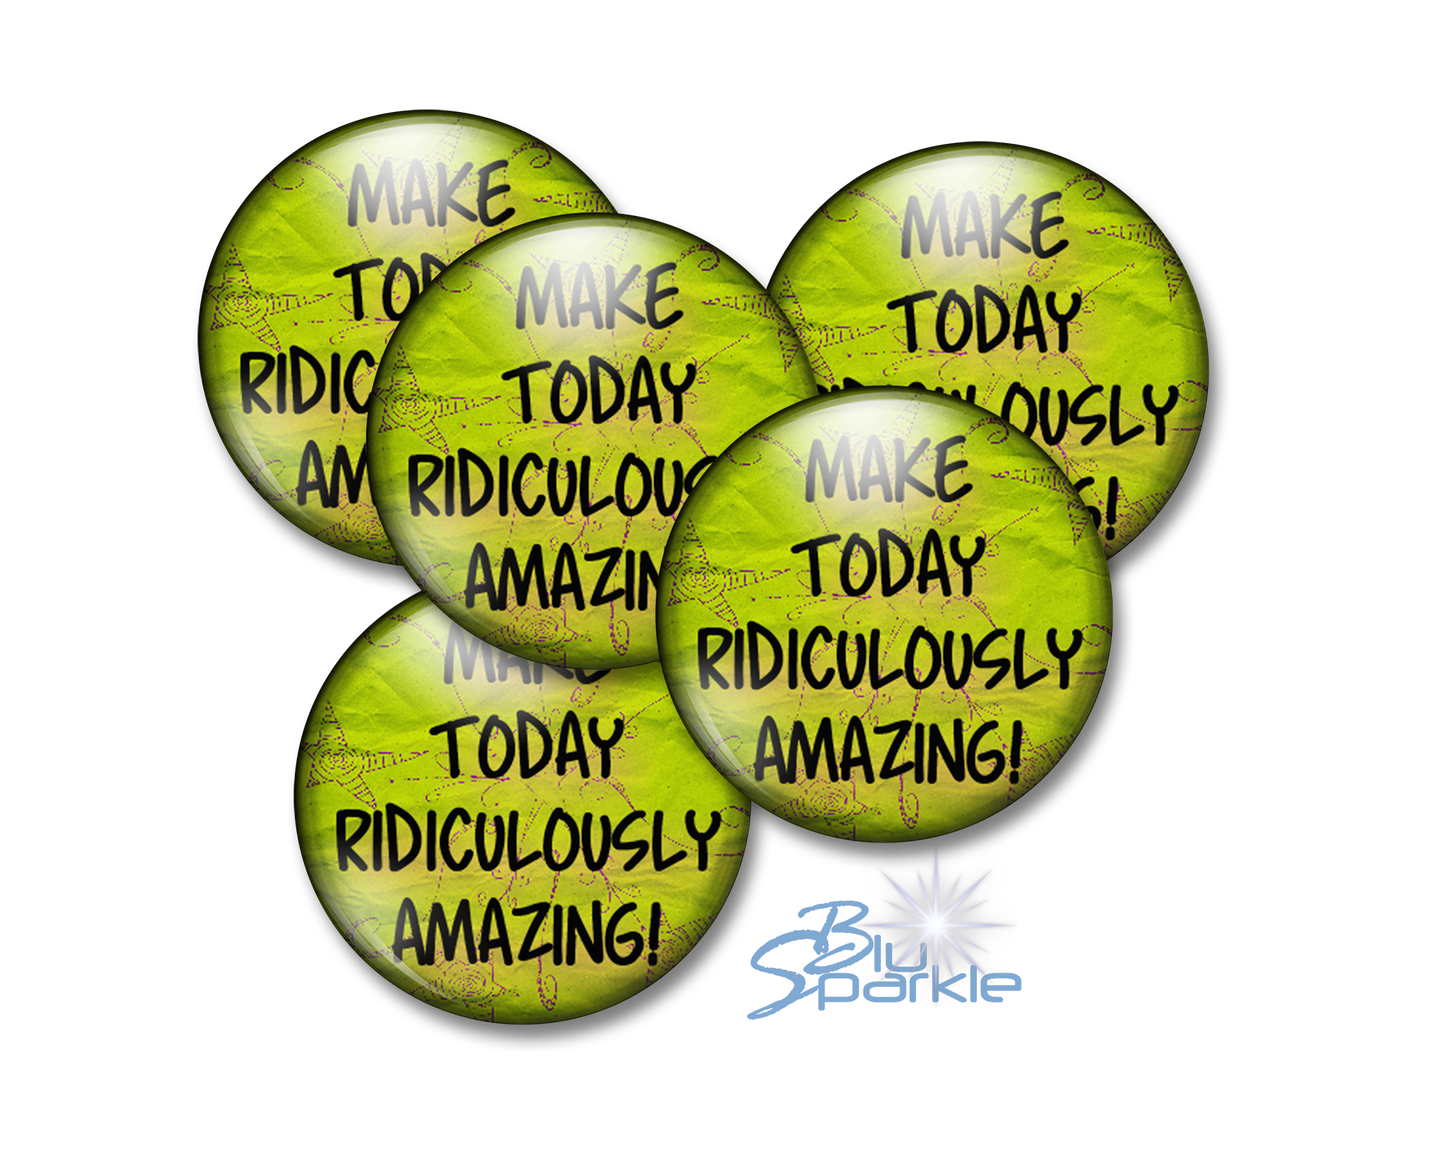 Make Today Ridiculously Amazing! - Pinback Buttons